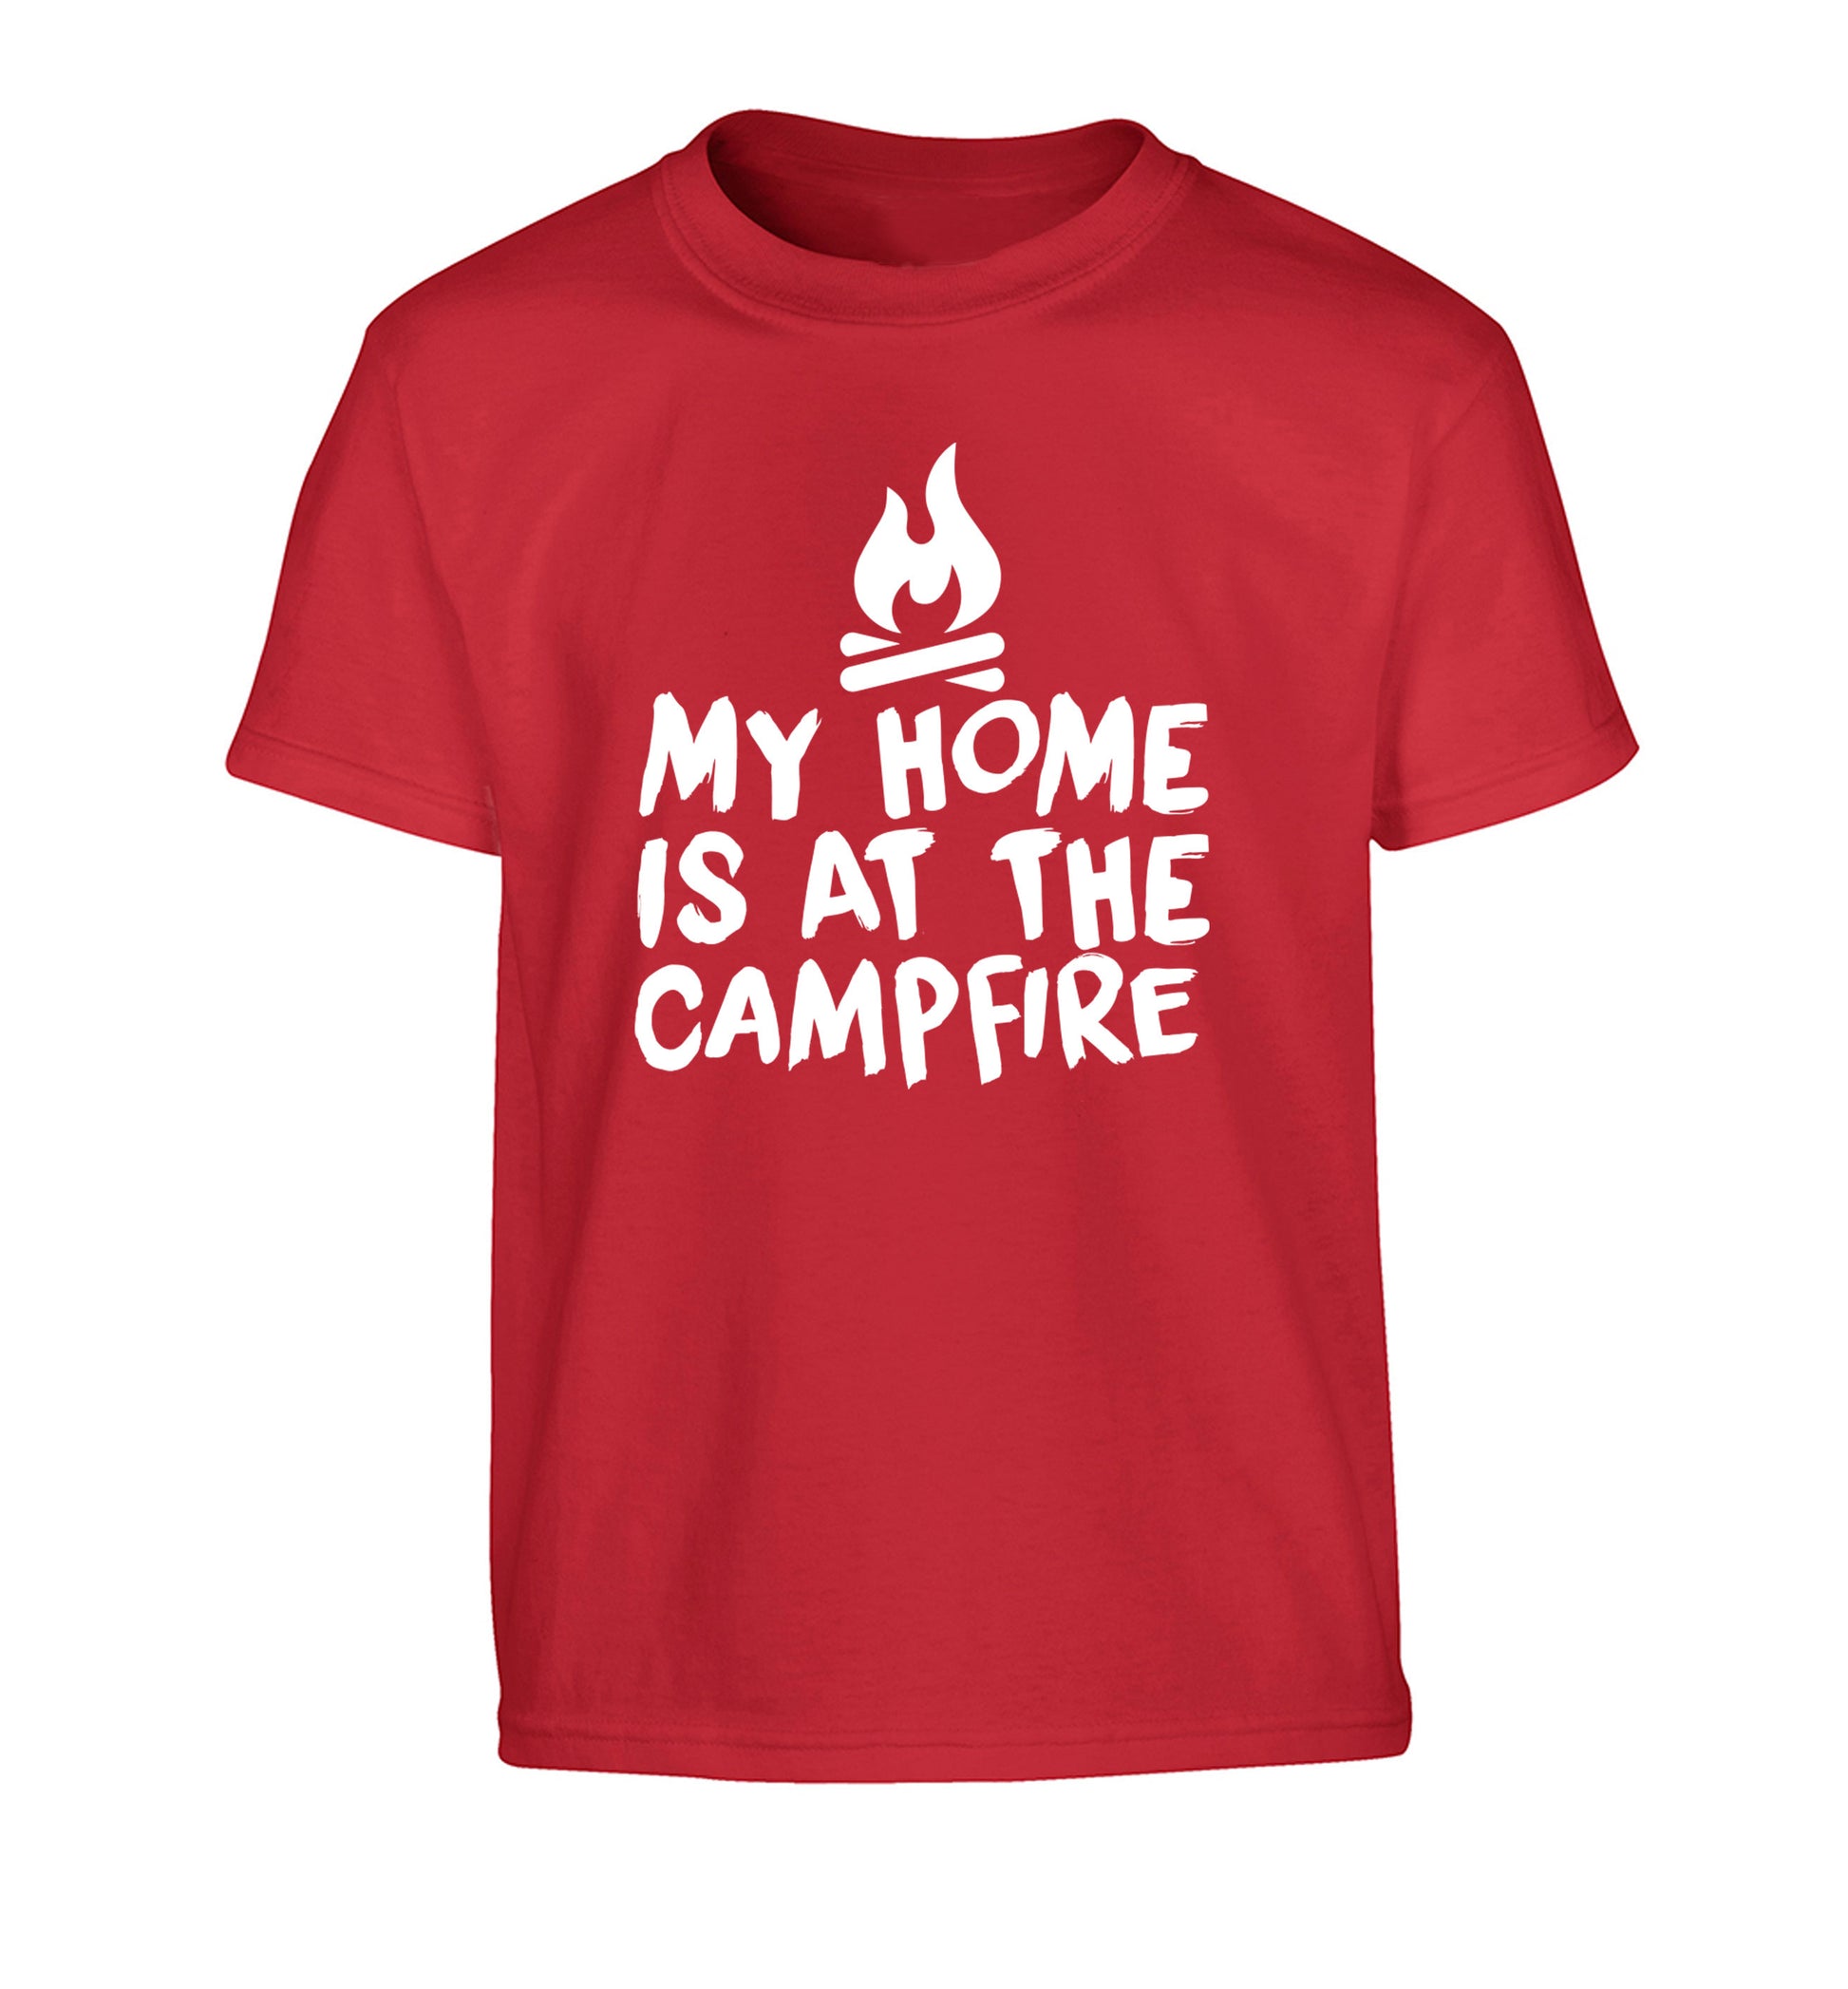 My home is at the campfire Children's red Tshirt 12-14 Years